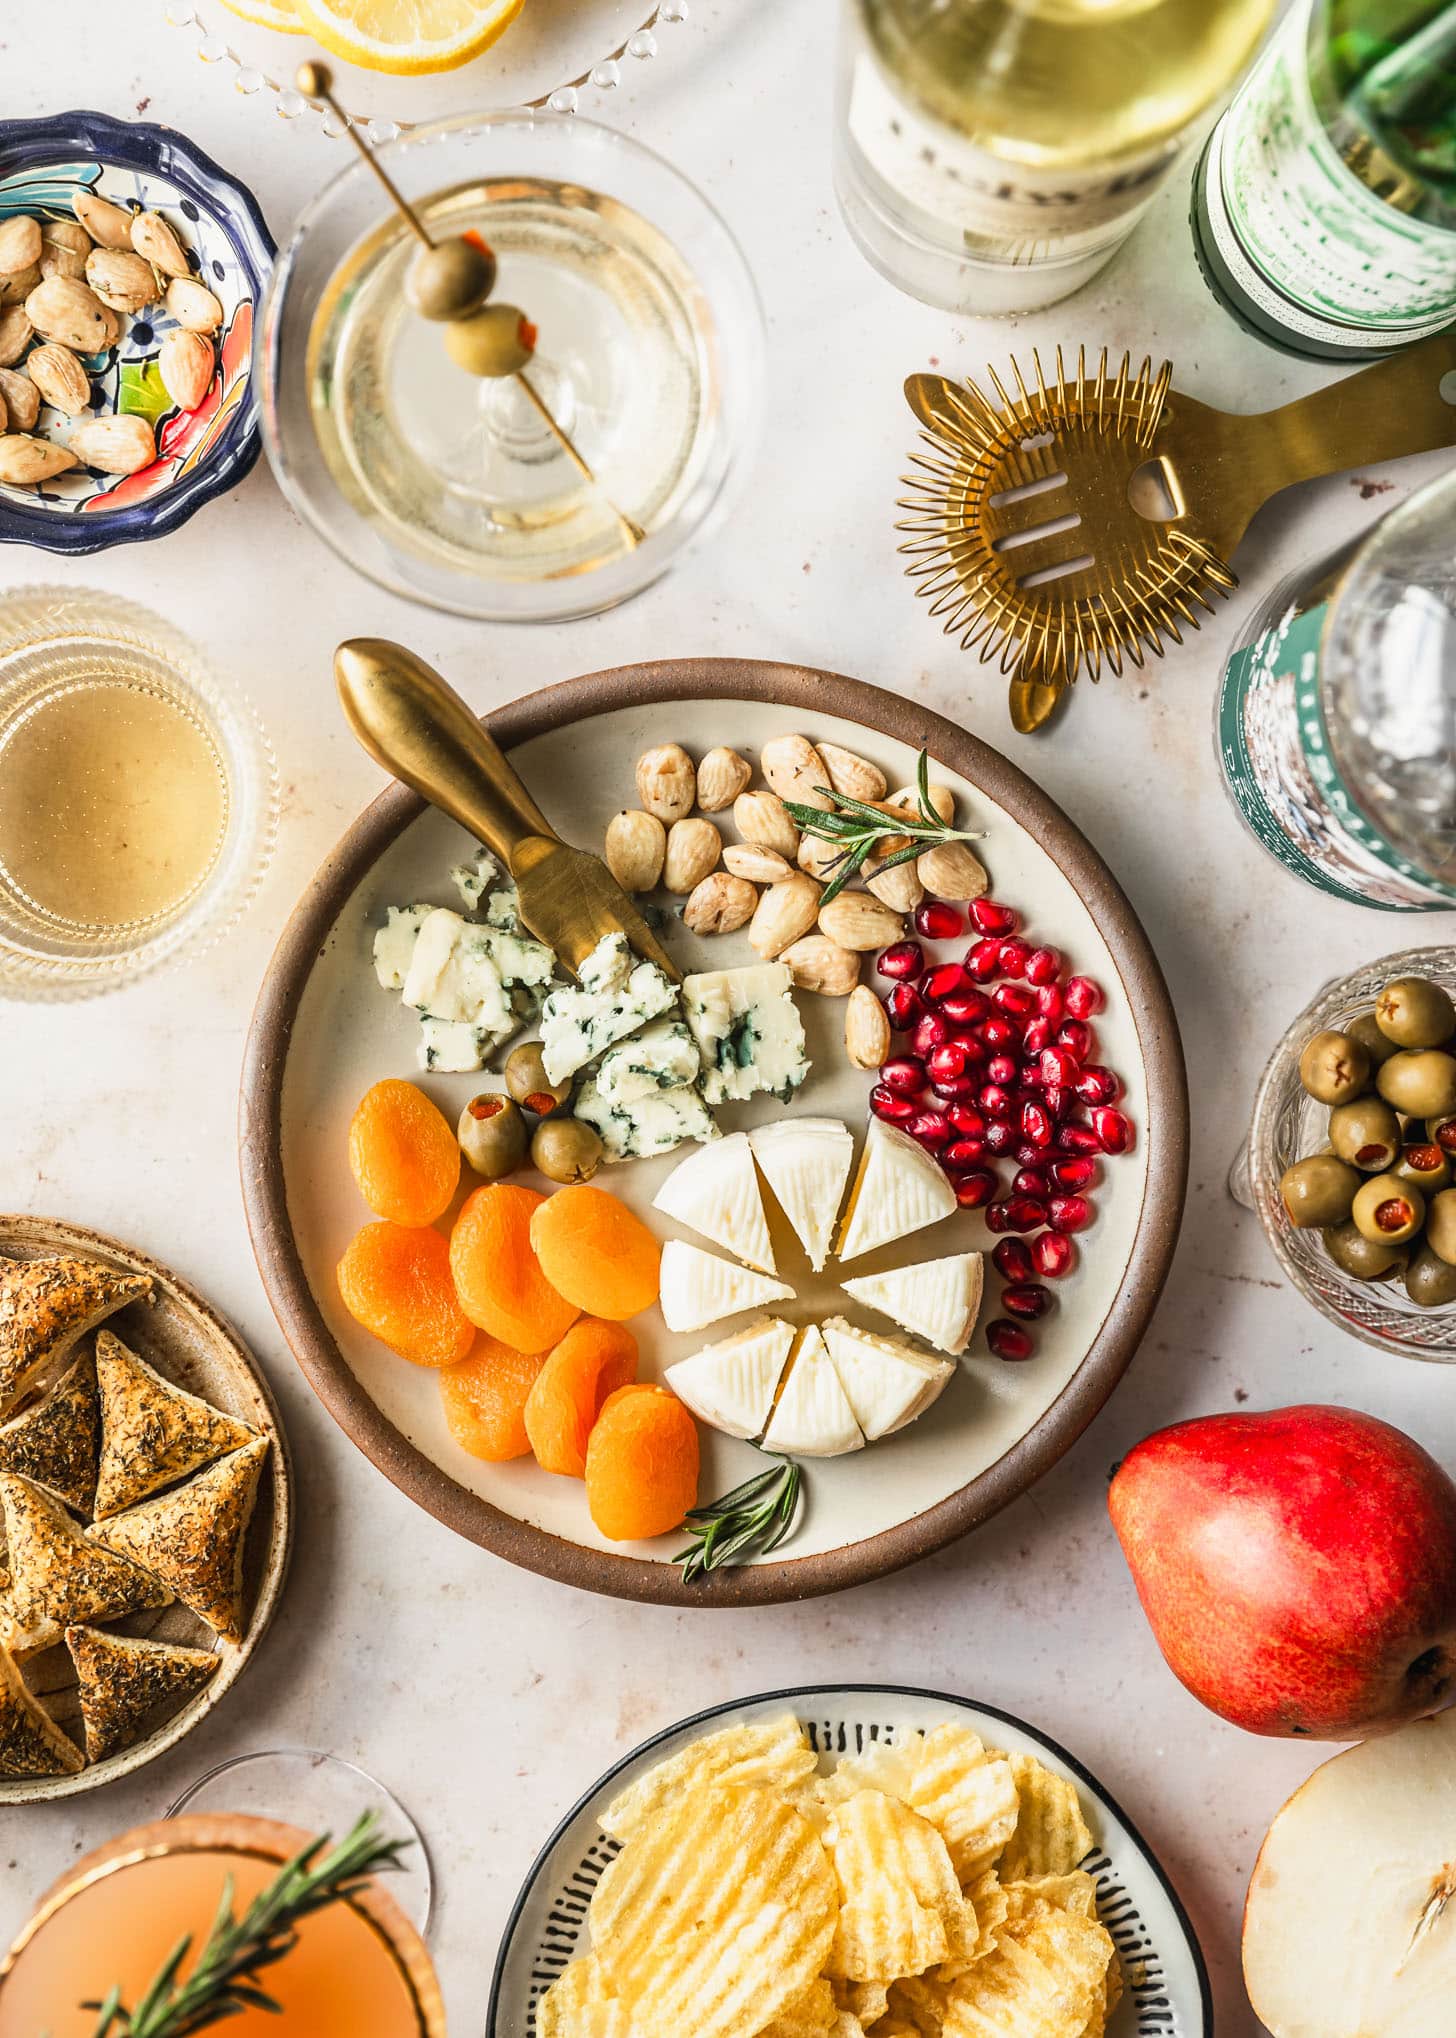 Unique Ideas for a Cocktail Party at Home | A small cheese plate, cocktails, alcohol bottles, chips, crackers, and olives on a beige counter.